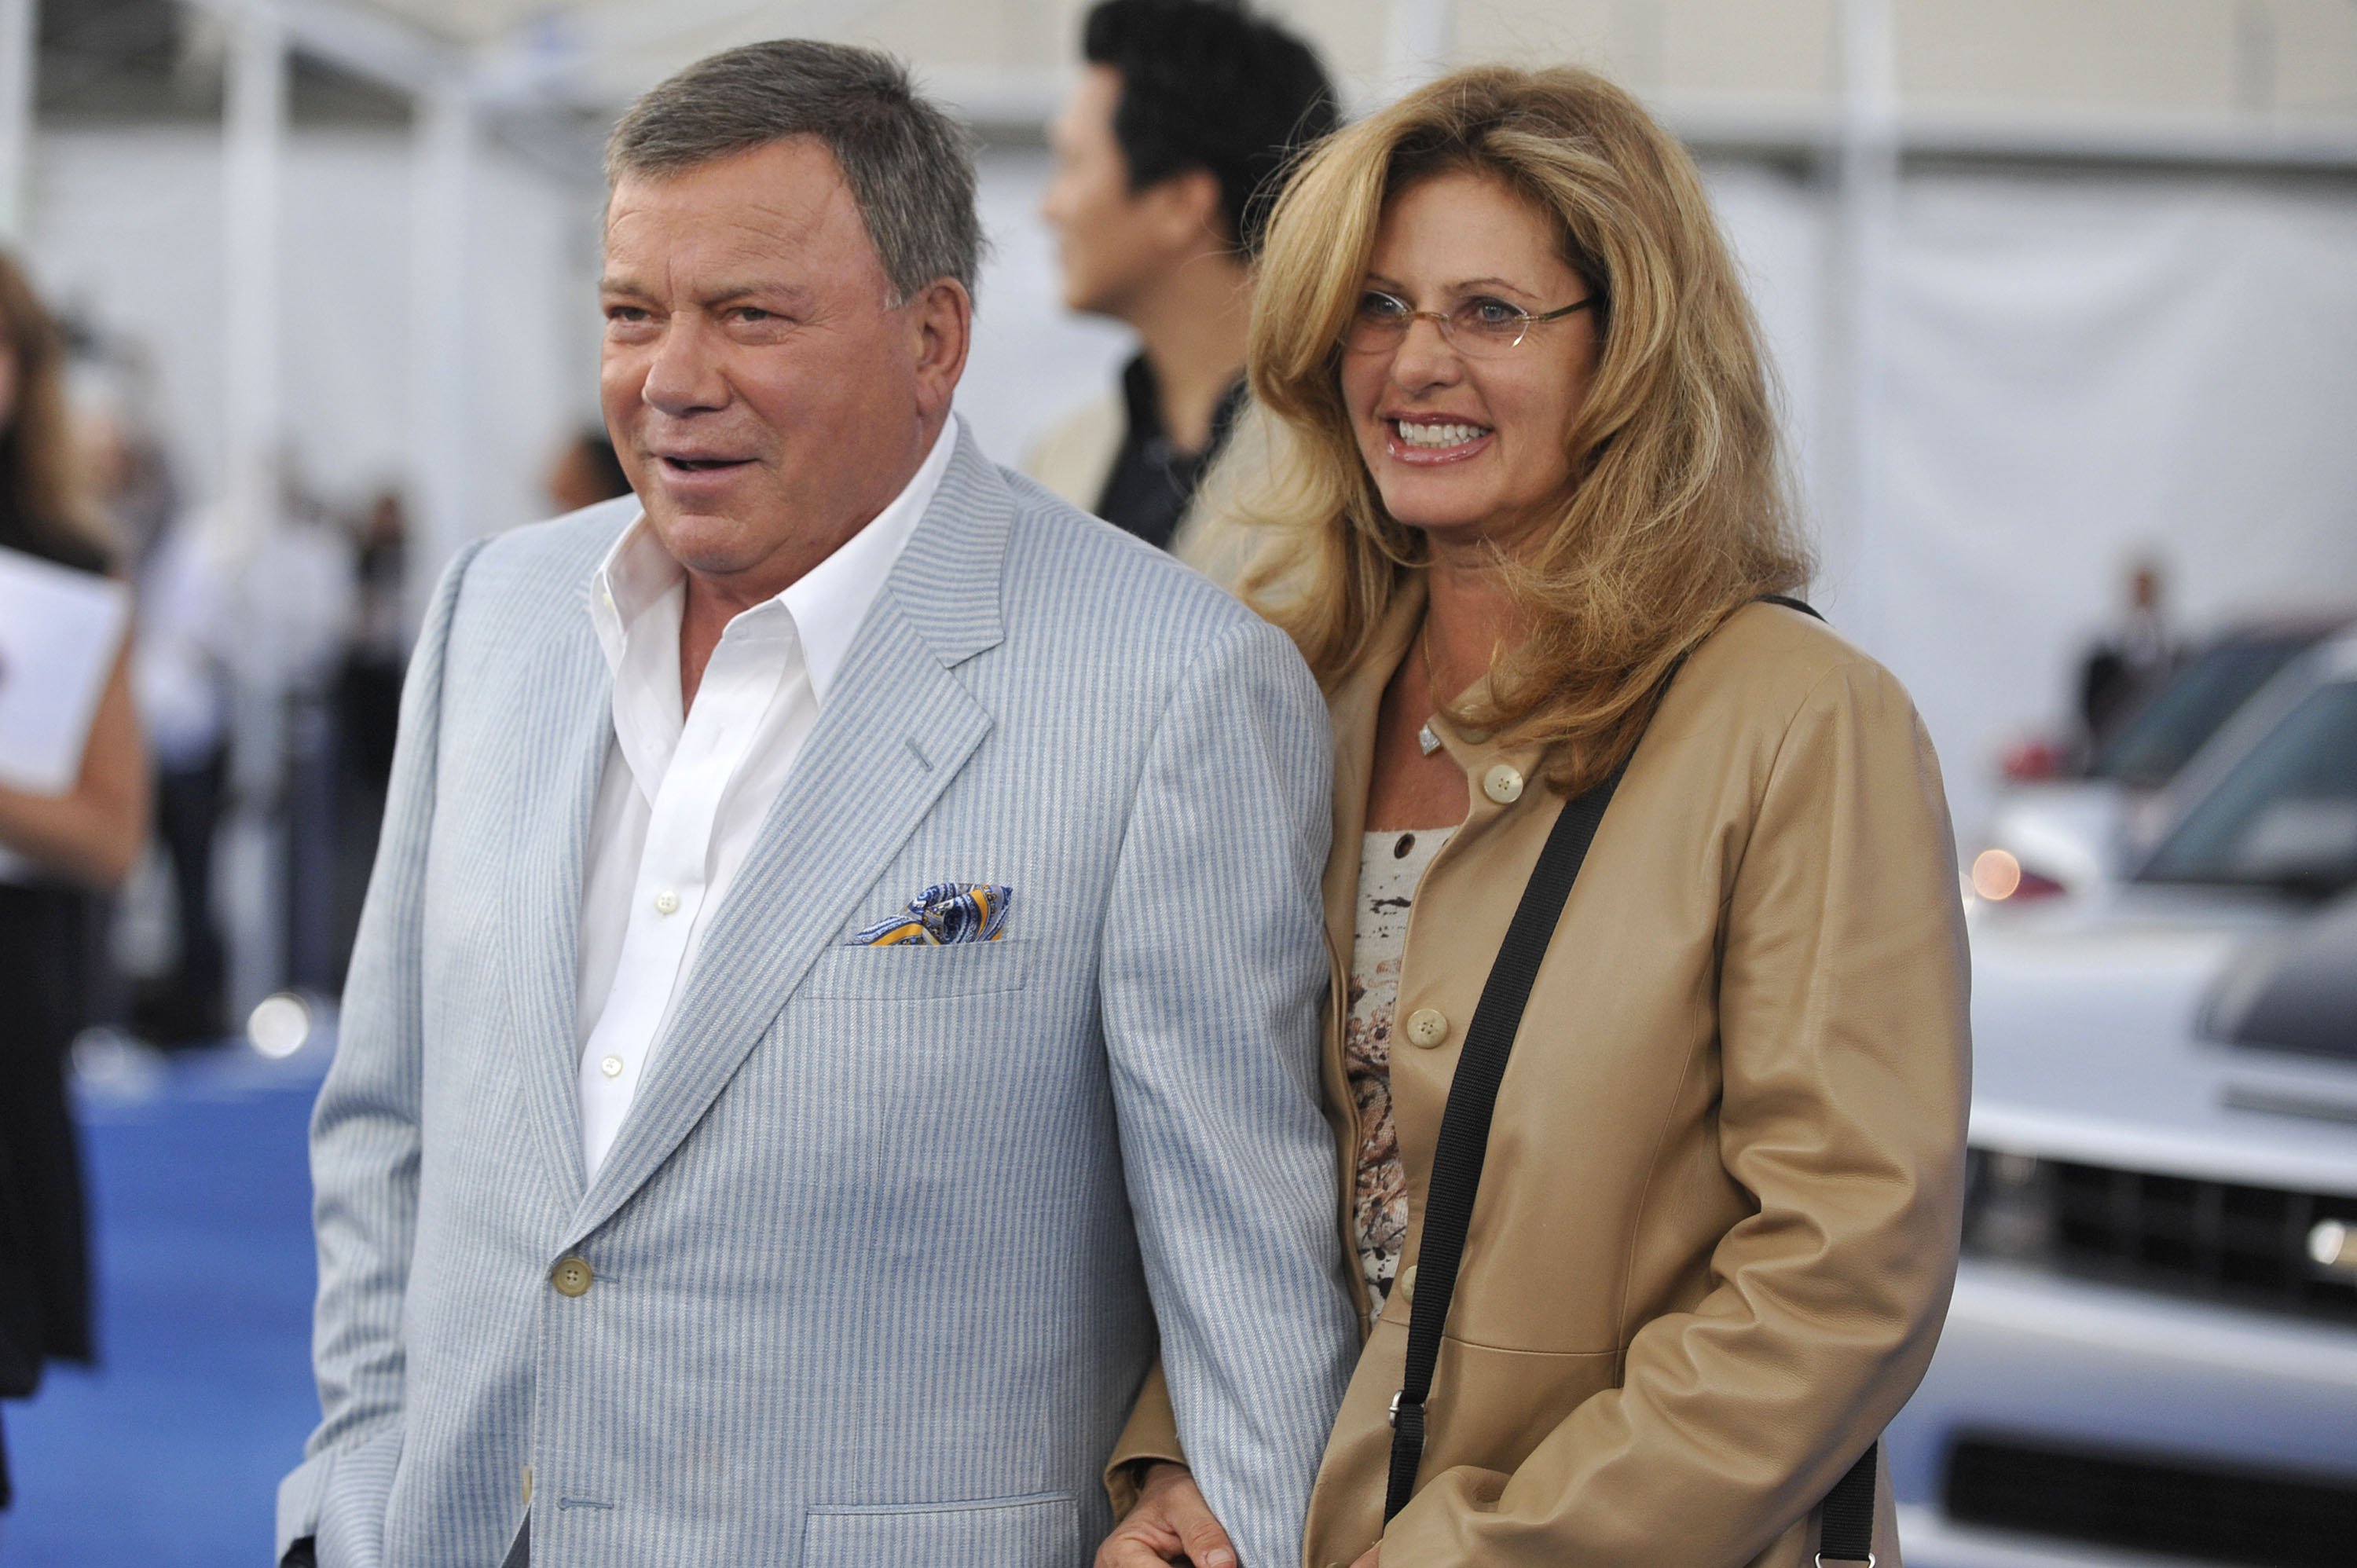 William and Elizabeth Shatner attend the CBS event "Cruze Into The Fall" held at The Colony on September 16, 2010, in Los Angeles, California. | Source: Getty Images.